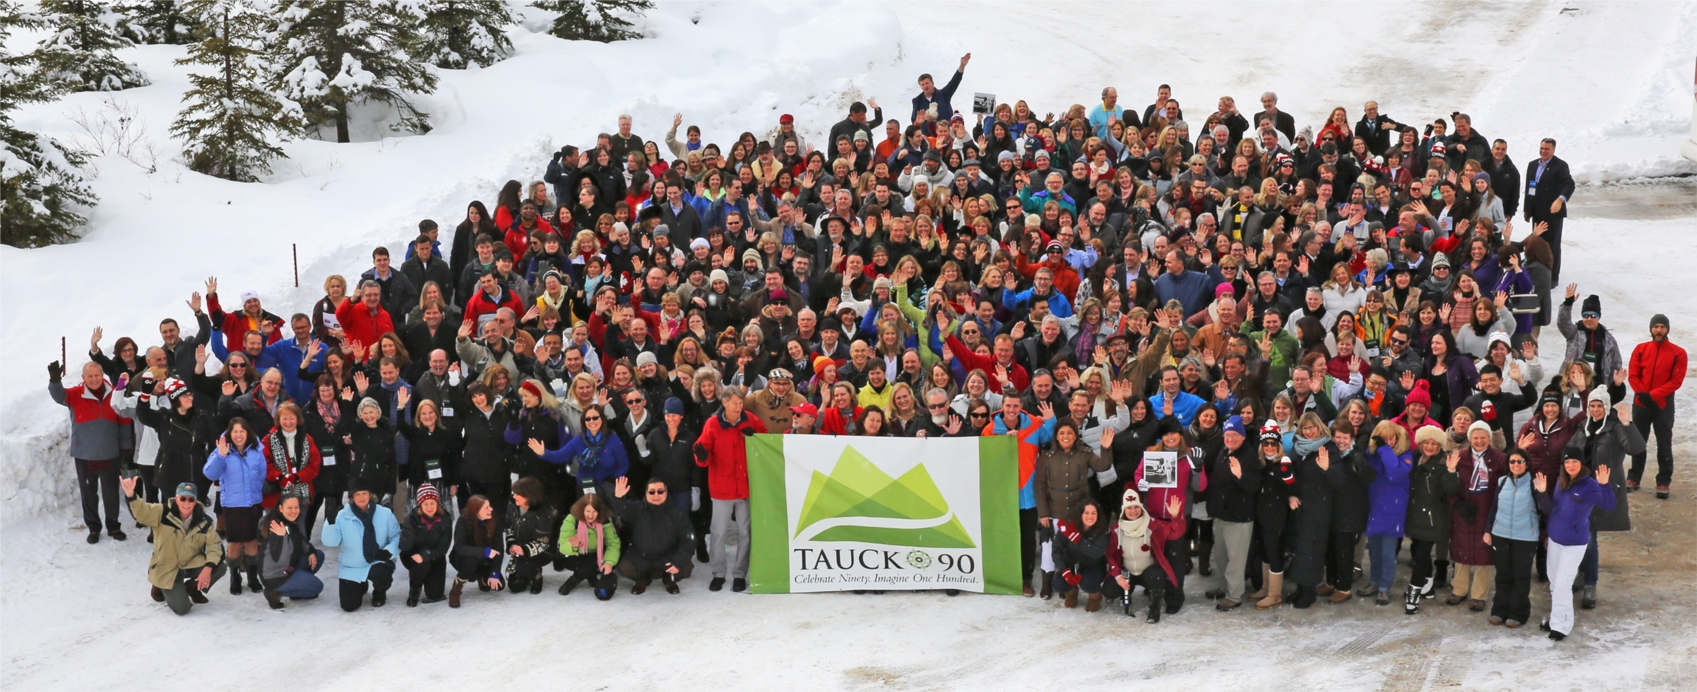 What happens when you bring together some 500 Tauck employees and suppliers for a 90th Anniversary Celebration in one of the most spectacular alpine settings in North America?  The kind of heartfelt travel magic that has become the signature hallmark of the Tauck family for 90 years